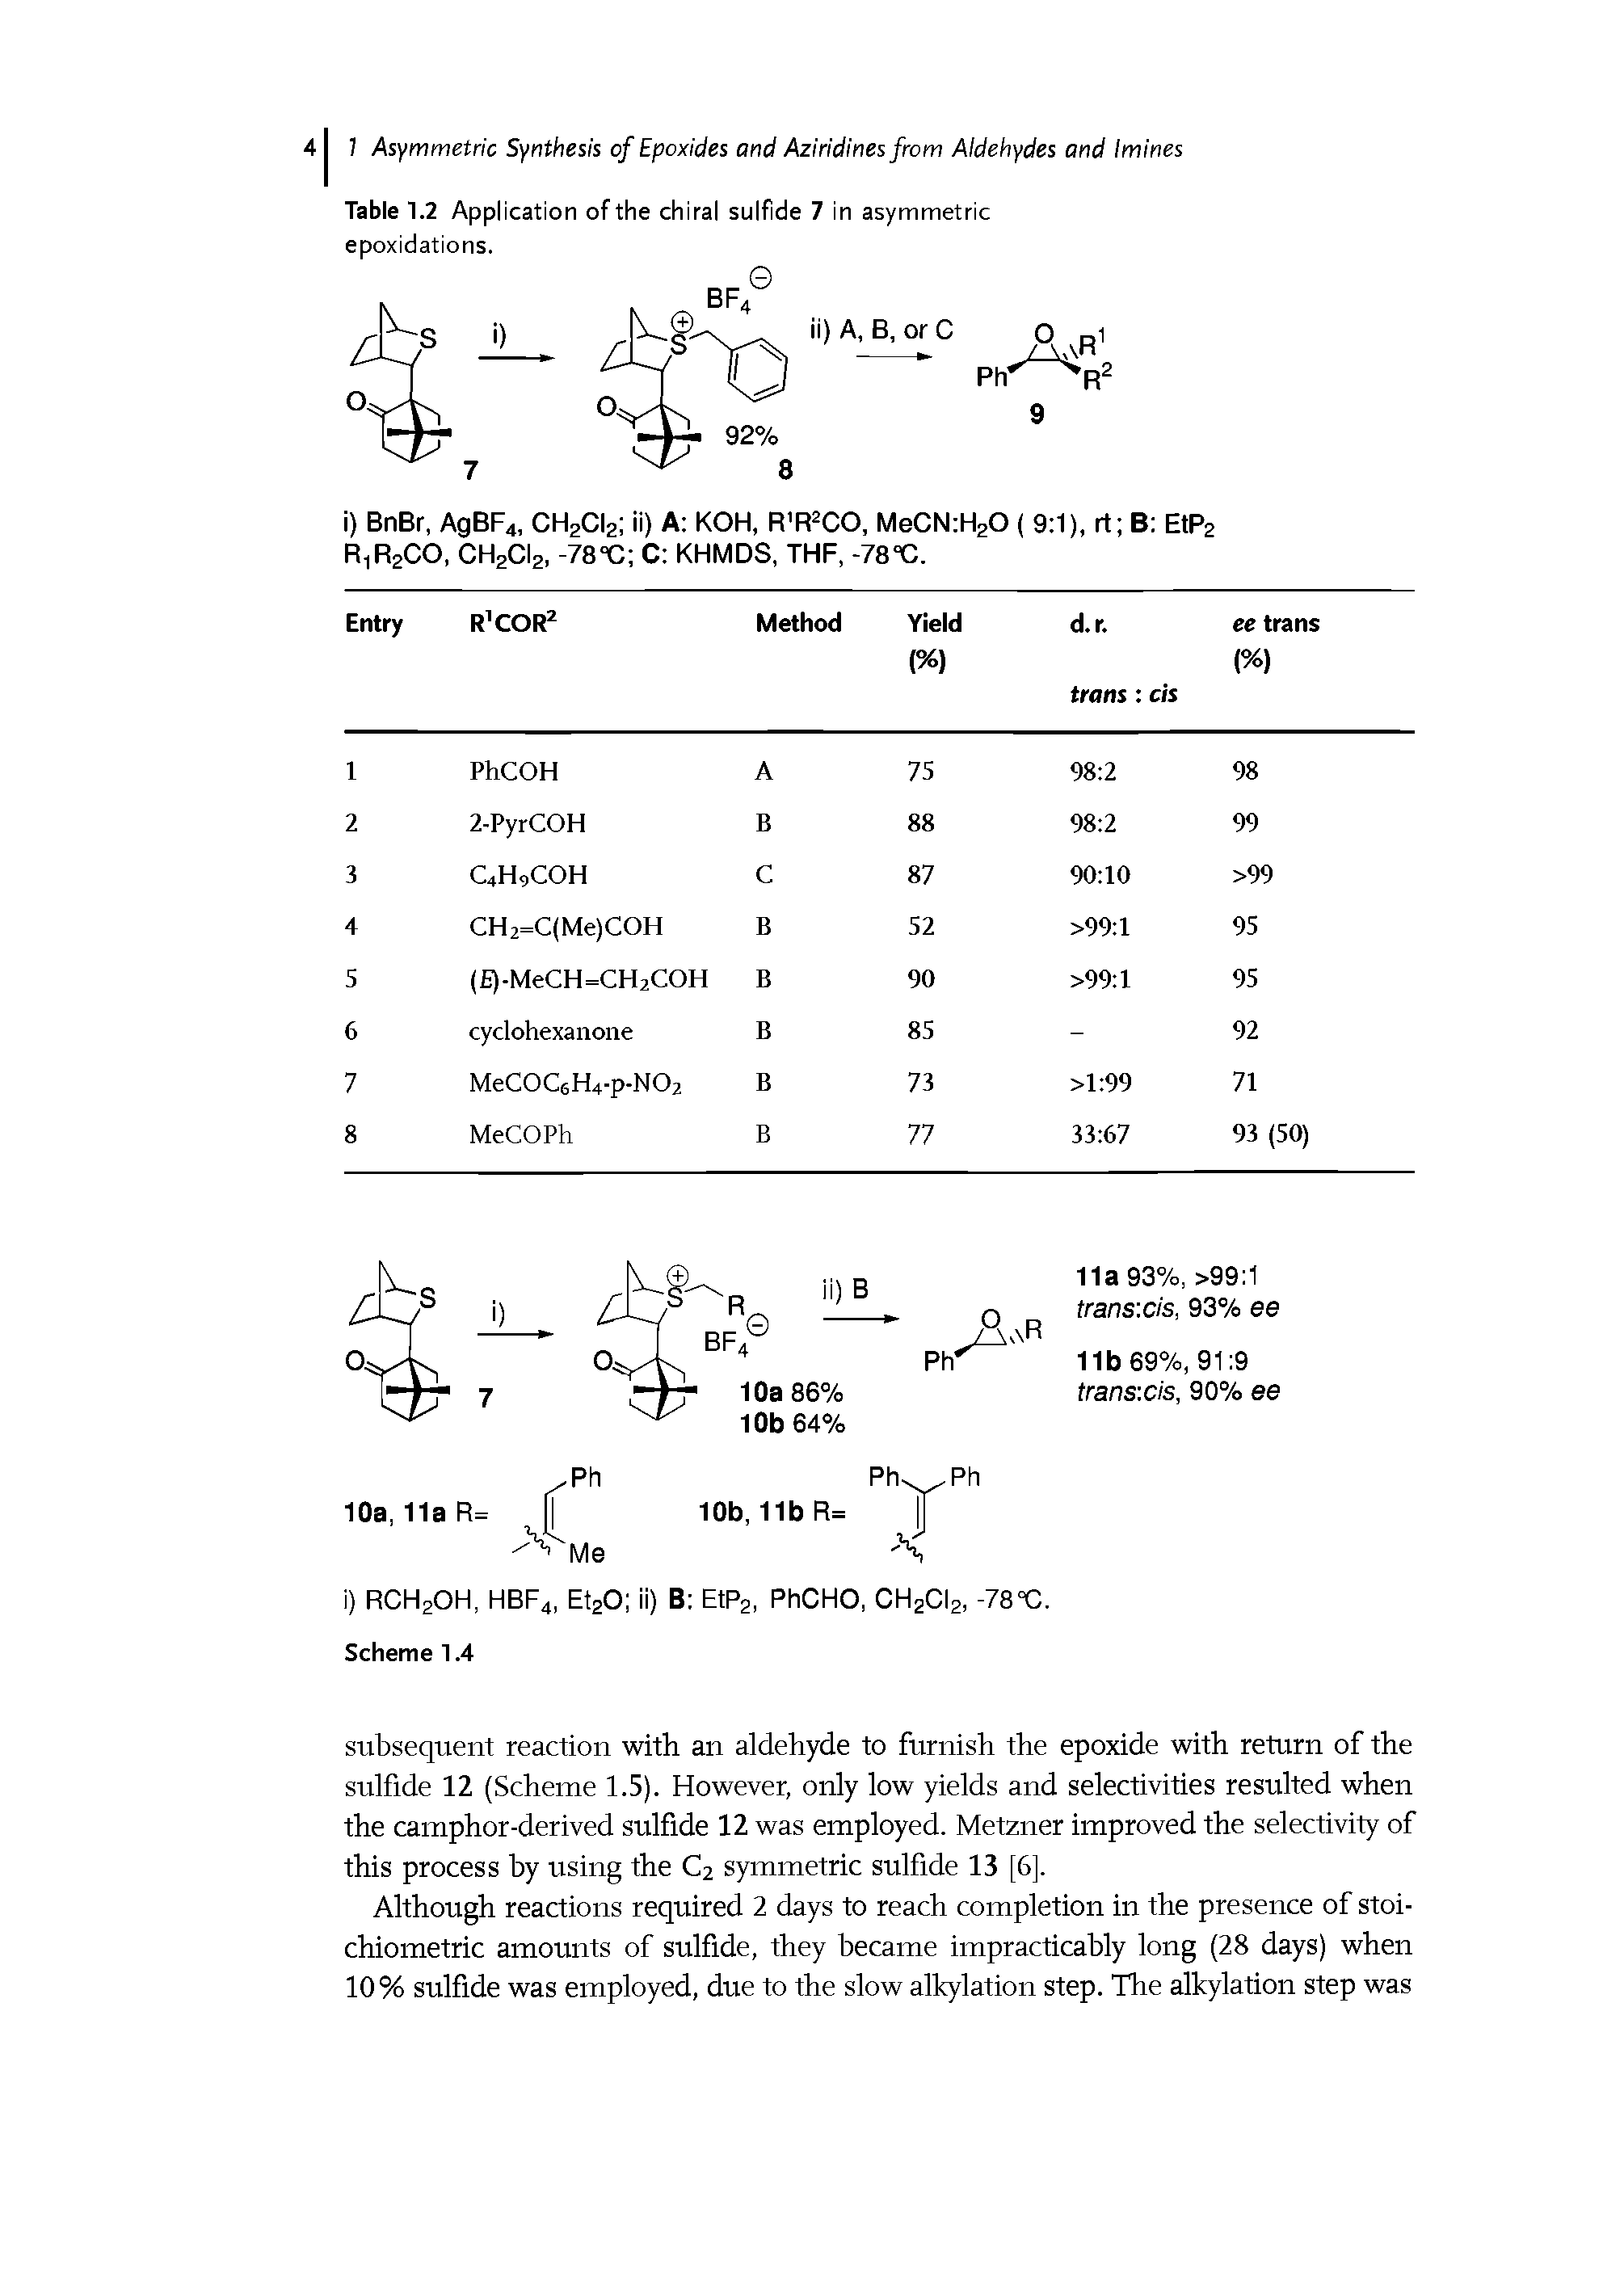 Table 1.2 Application of the chiral sulfide 7 in asymmetric epoxidations.